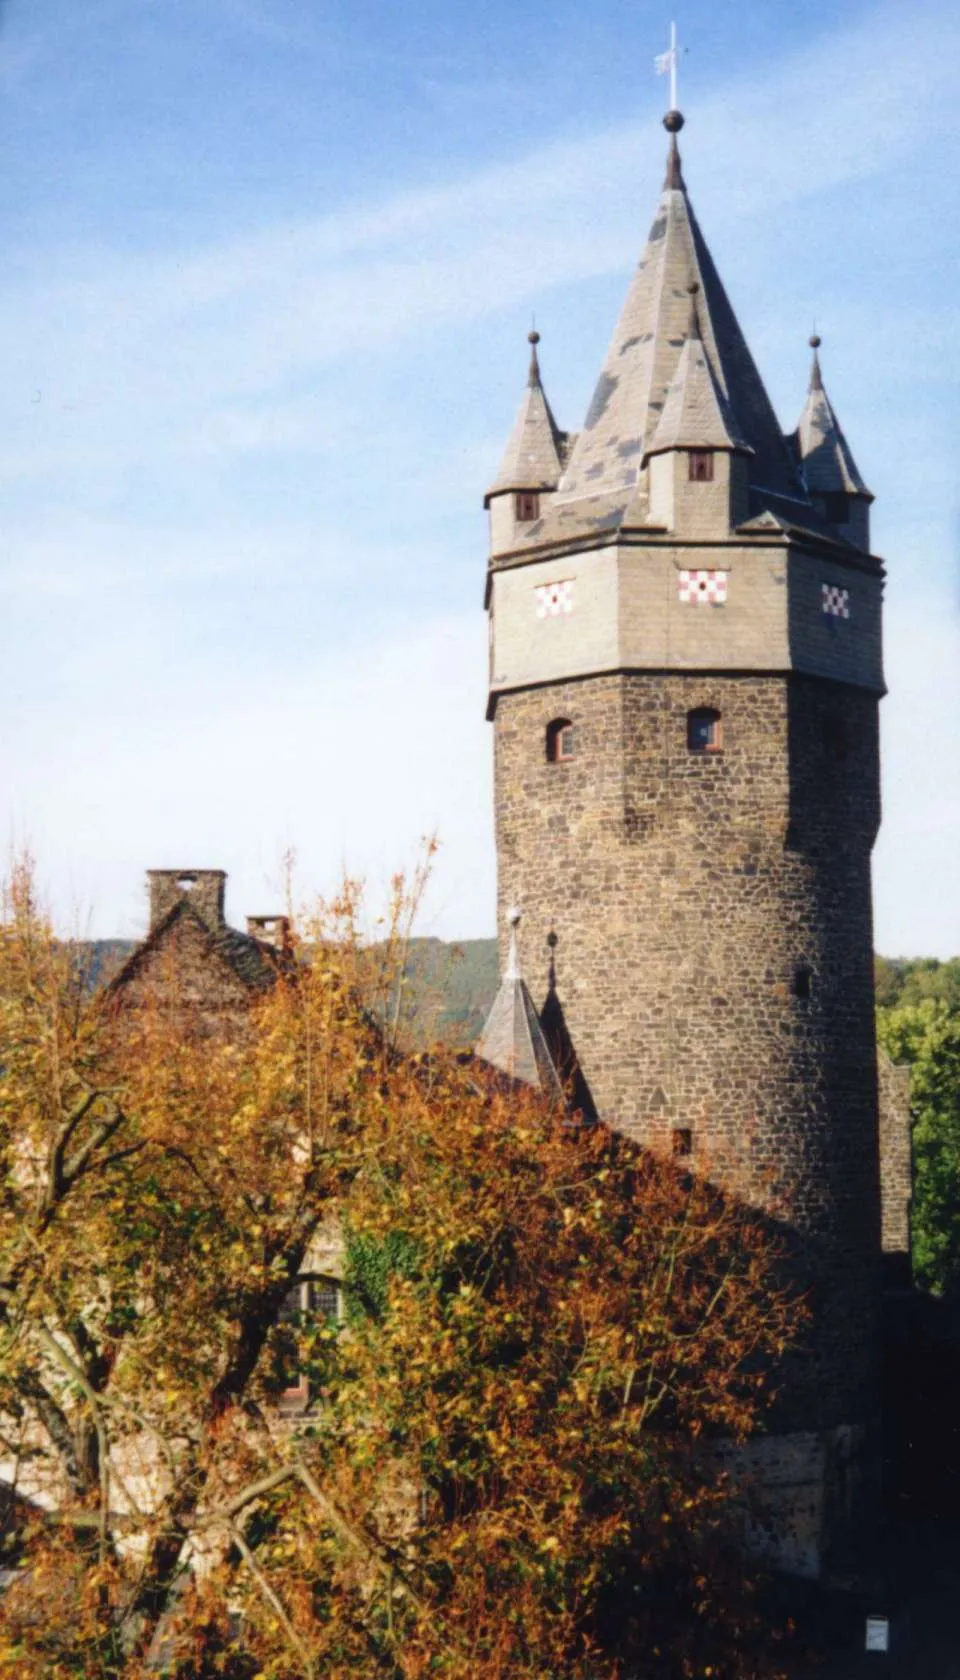 Photo showing: The Pulverturm (powder tower) of the Castle Altena.
Photo taken by User:Ahoerstemeier in November 2001.